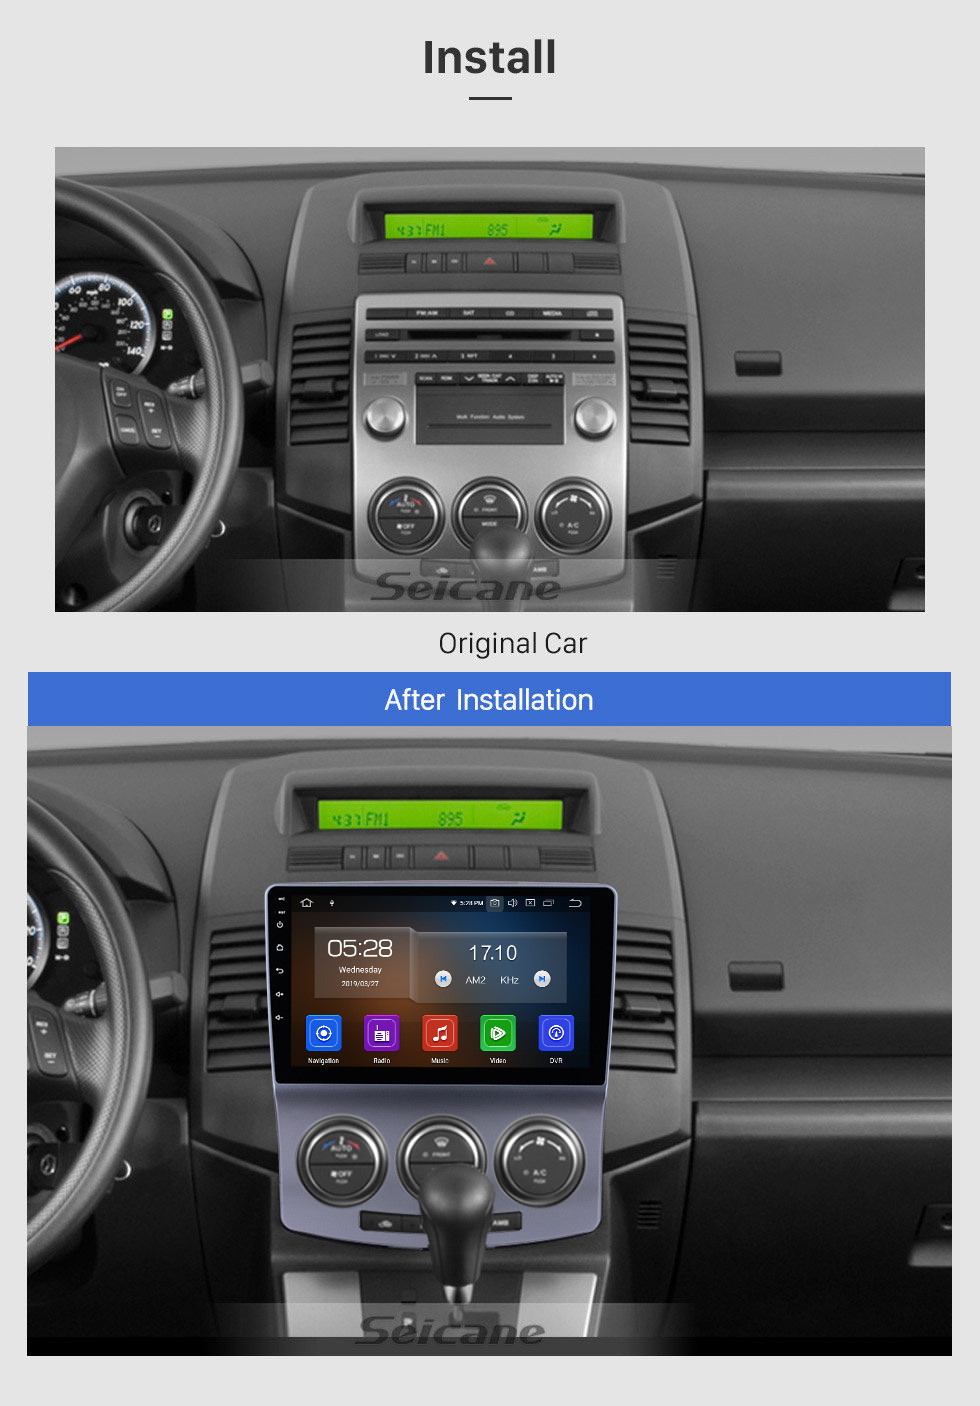 Seicane Android 11.0 Aftermarket OEM Car Stereo GPS Navigation System for 2005-2010 Mazda 5 with  Wifi DVD Radio Bluetooth USB SD Rearview Camera